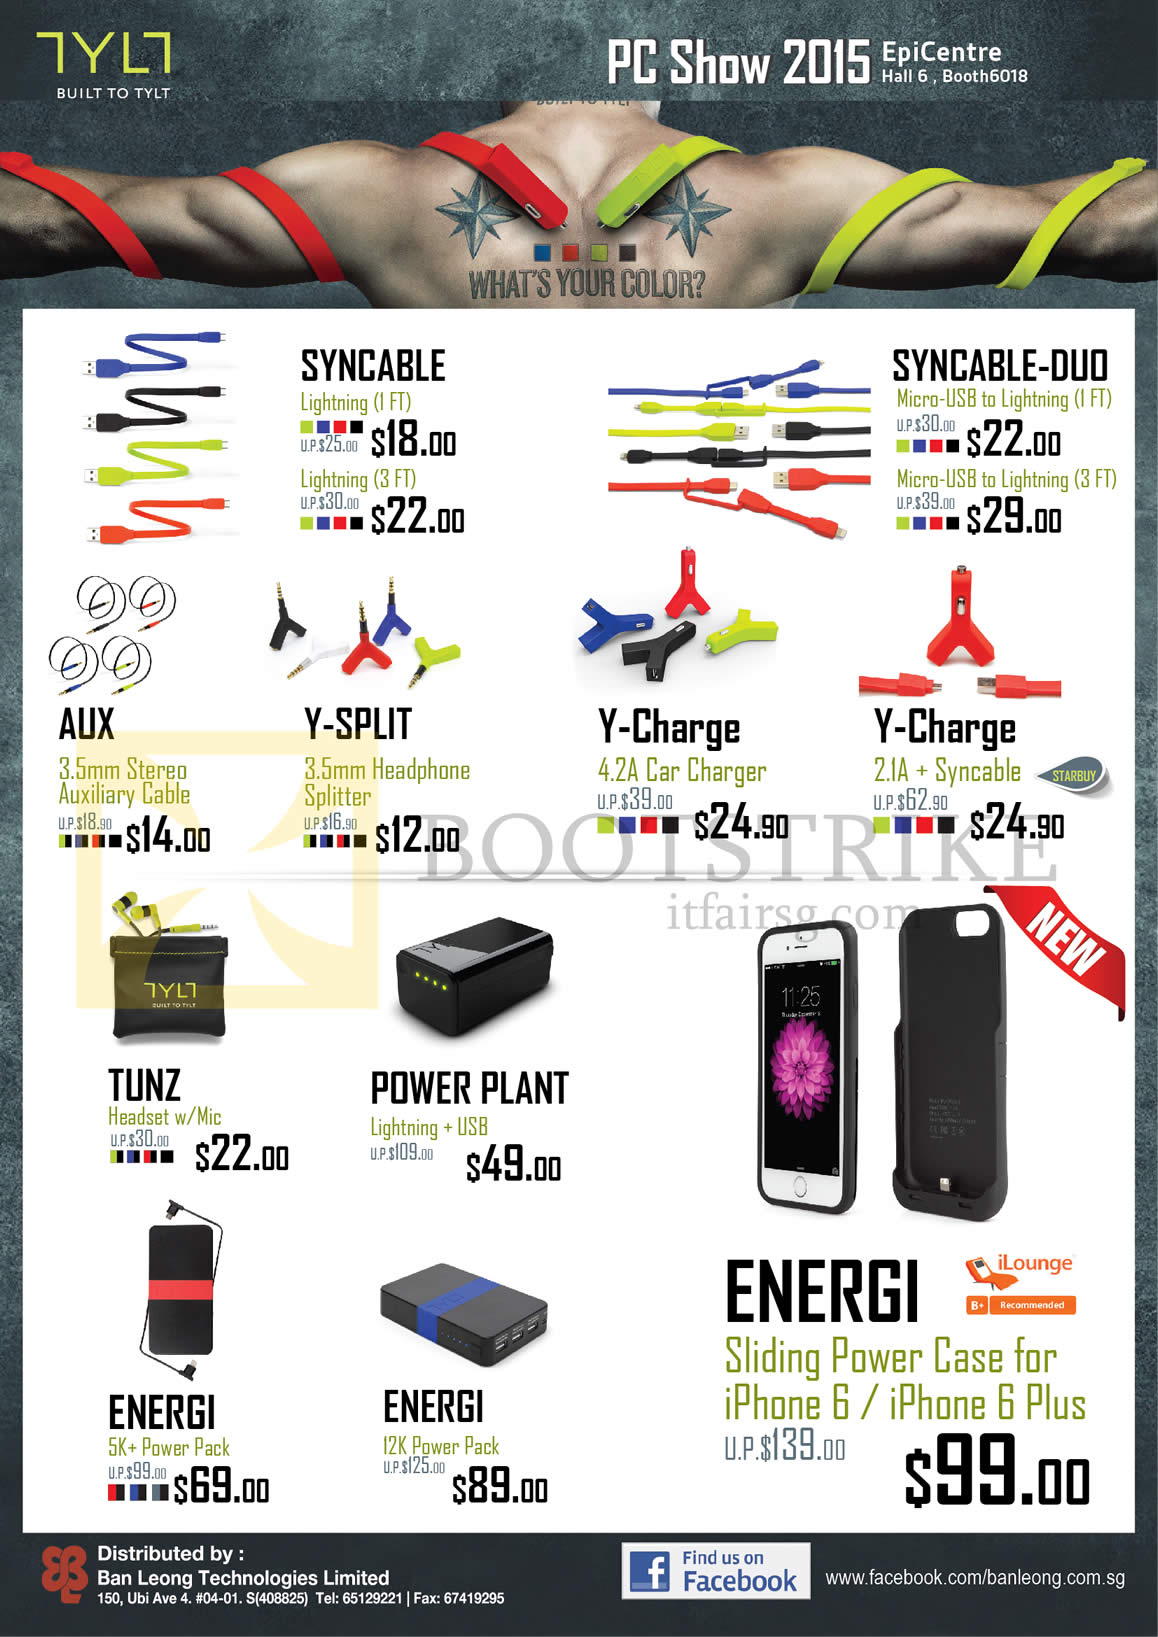 PC SHOW 2015 price list image brochure of EpiCentre Tylt Accessories Lightning Cables, MicroUSB, 3.5mm Stereo, Car Charger, Splitter, Tunz Headset, Energi Power Bank